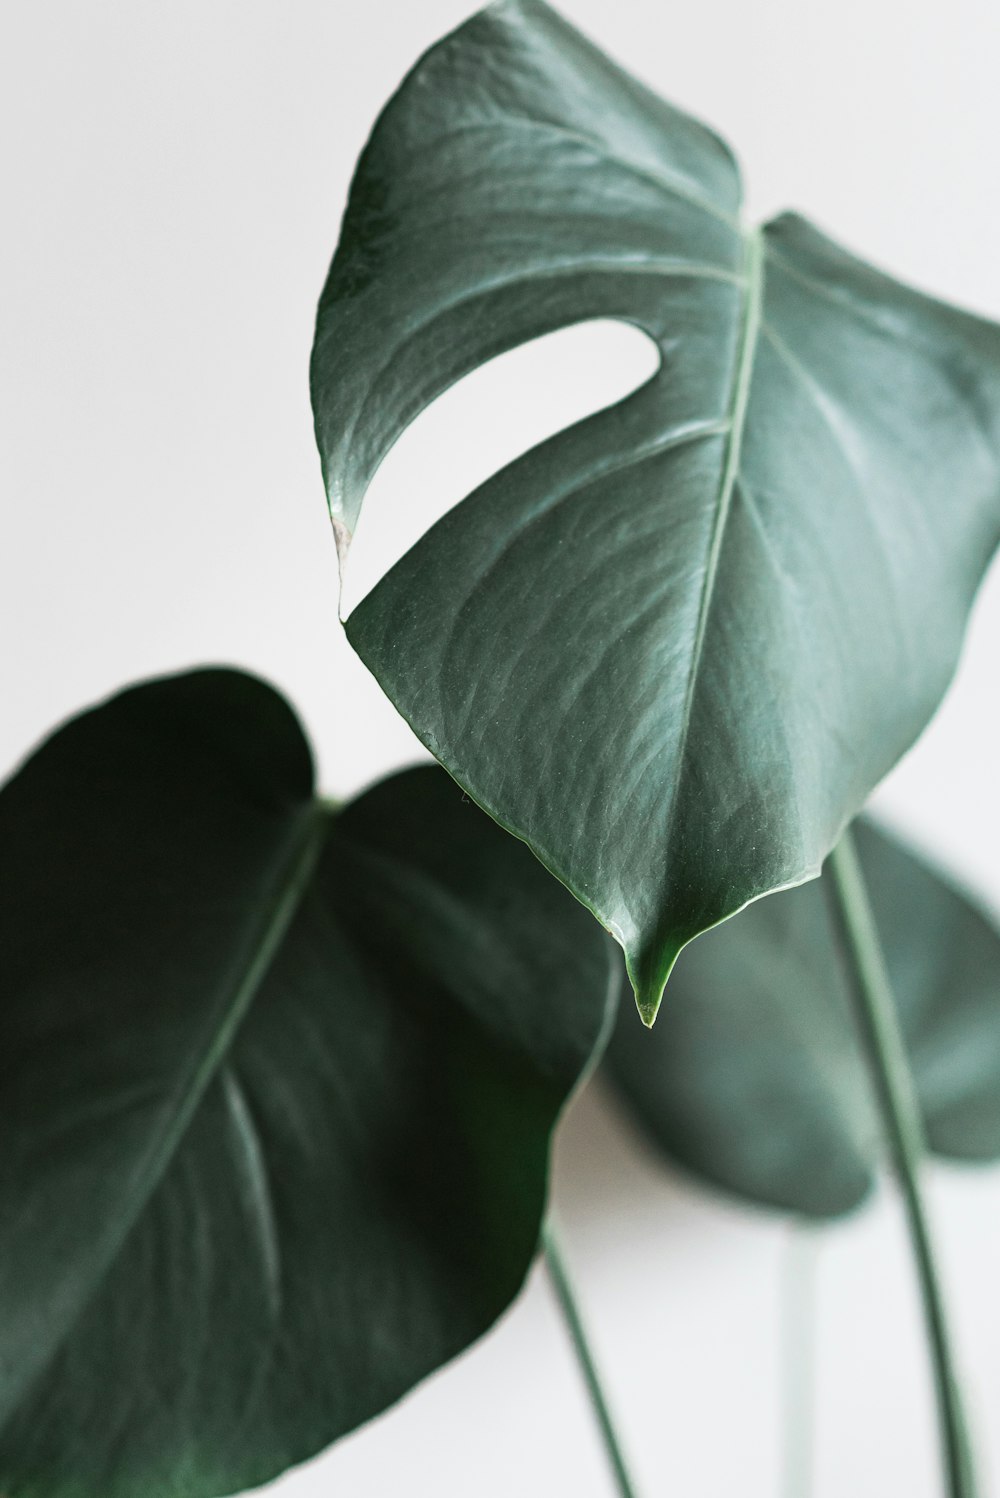 green leaves in white background photo – Free Plant Image on Unsplash